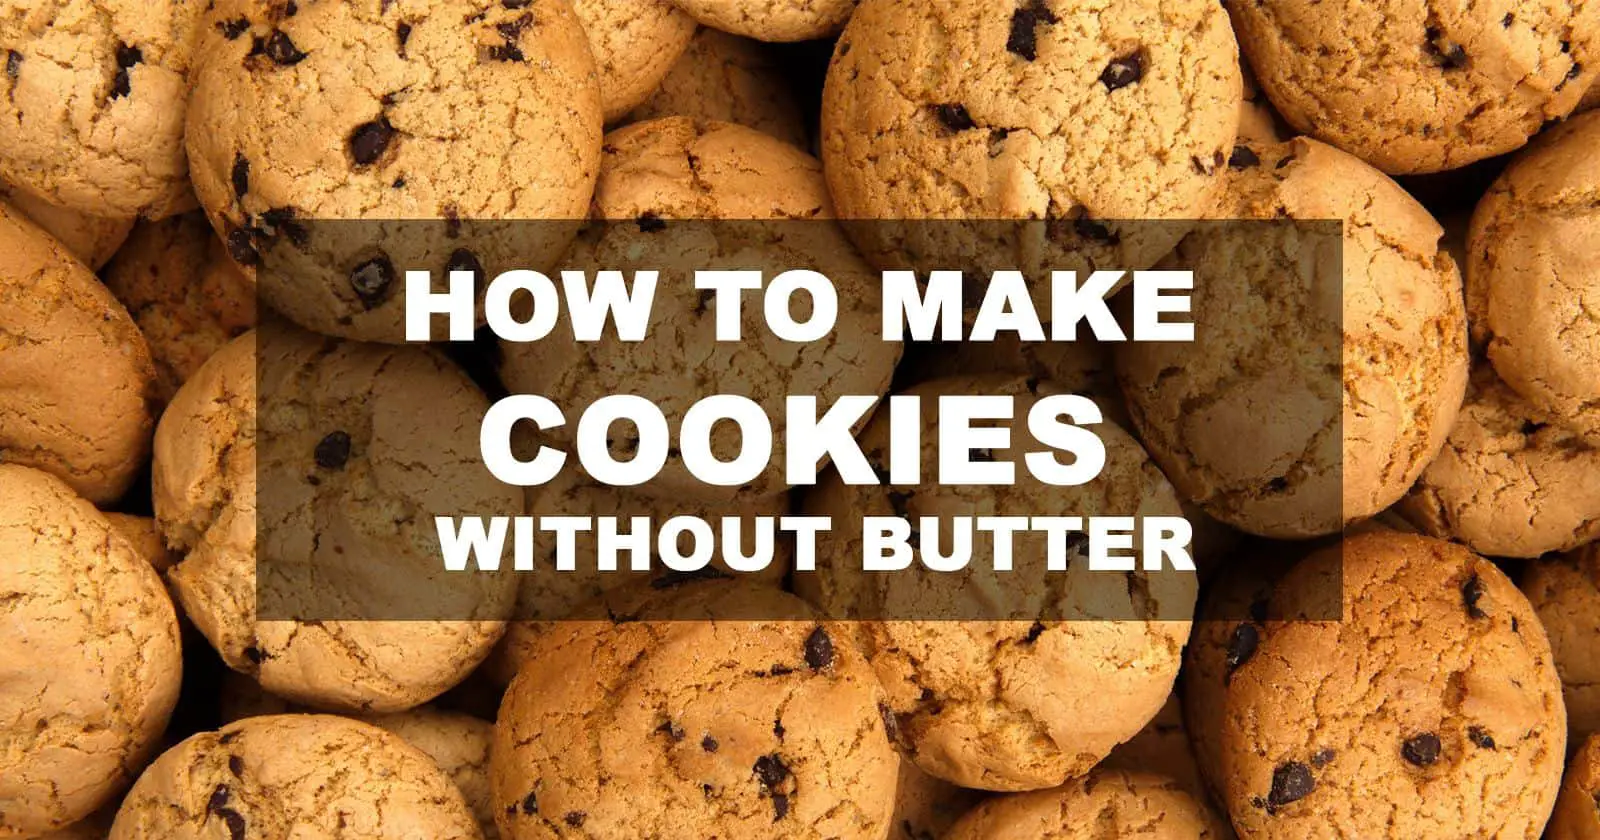 How to Make Cookies Without Butter